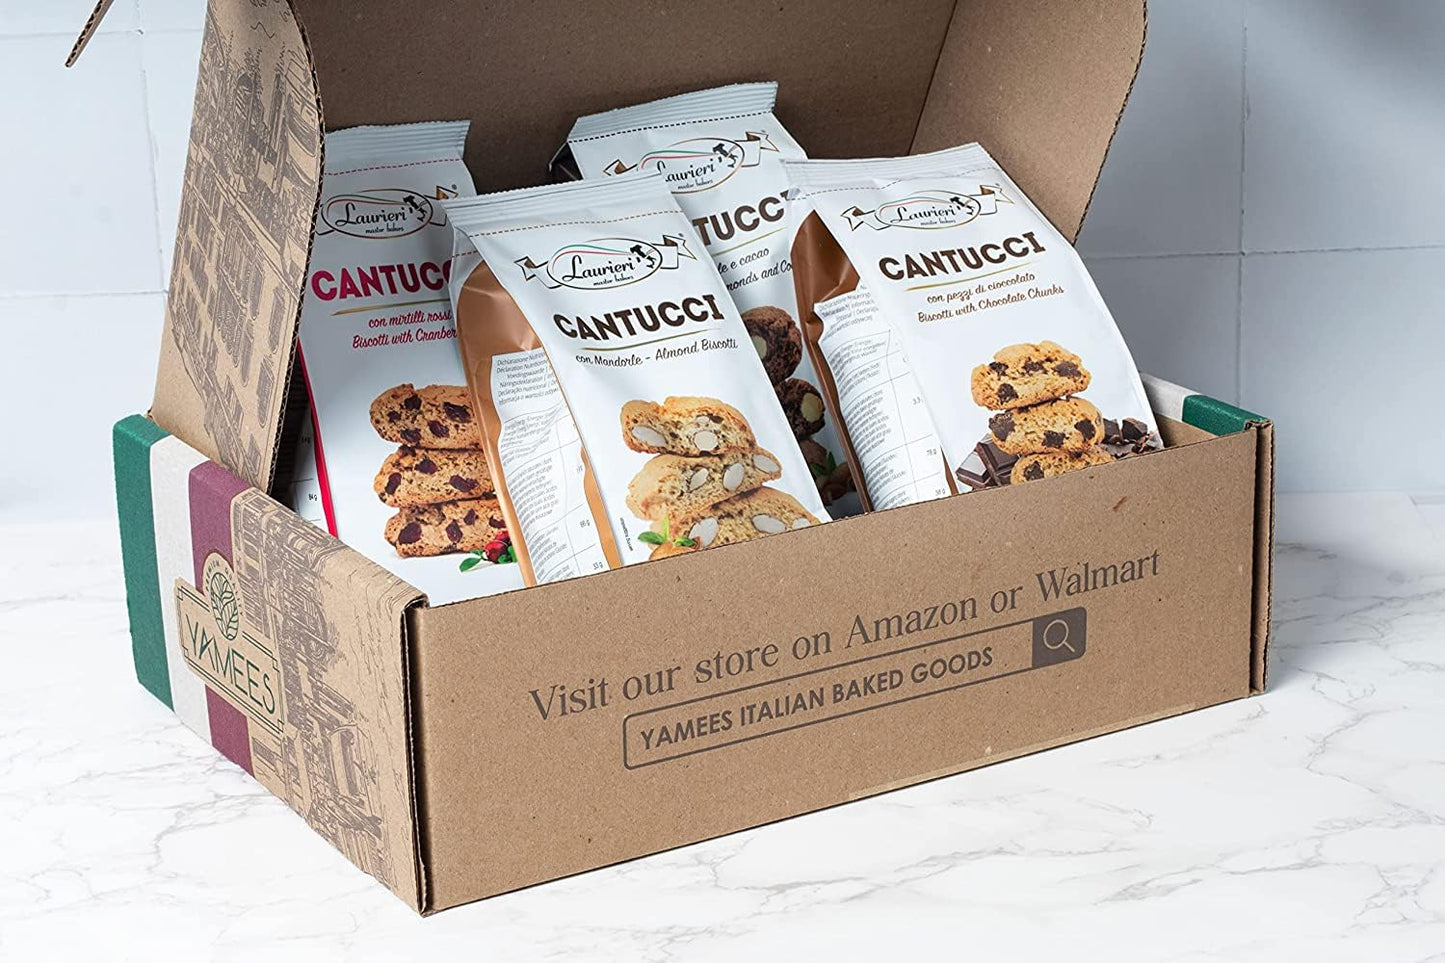 Italian Cookies Gift Box - Pack Of 4 - Cookie Gift from Italy - Amaretti, Frolletti, Quadrotti - Shortbread Cookie and Pastry Sampler - Sharing Size - Coconut, Almond, Cranberry and Cocoa Flavors - Kosher, Vegan, Preservatives Free